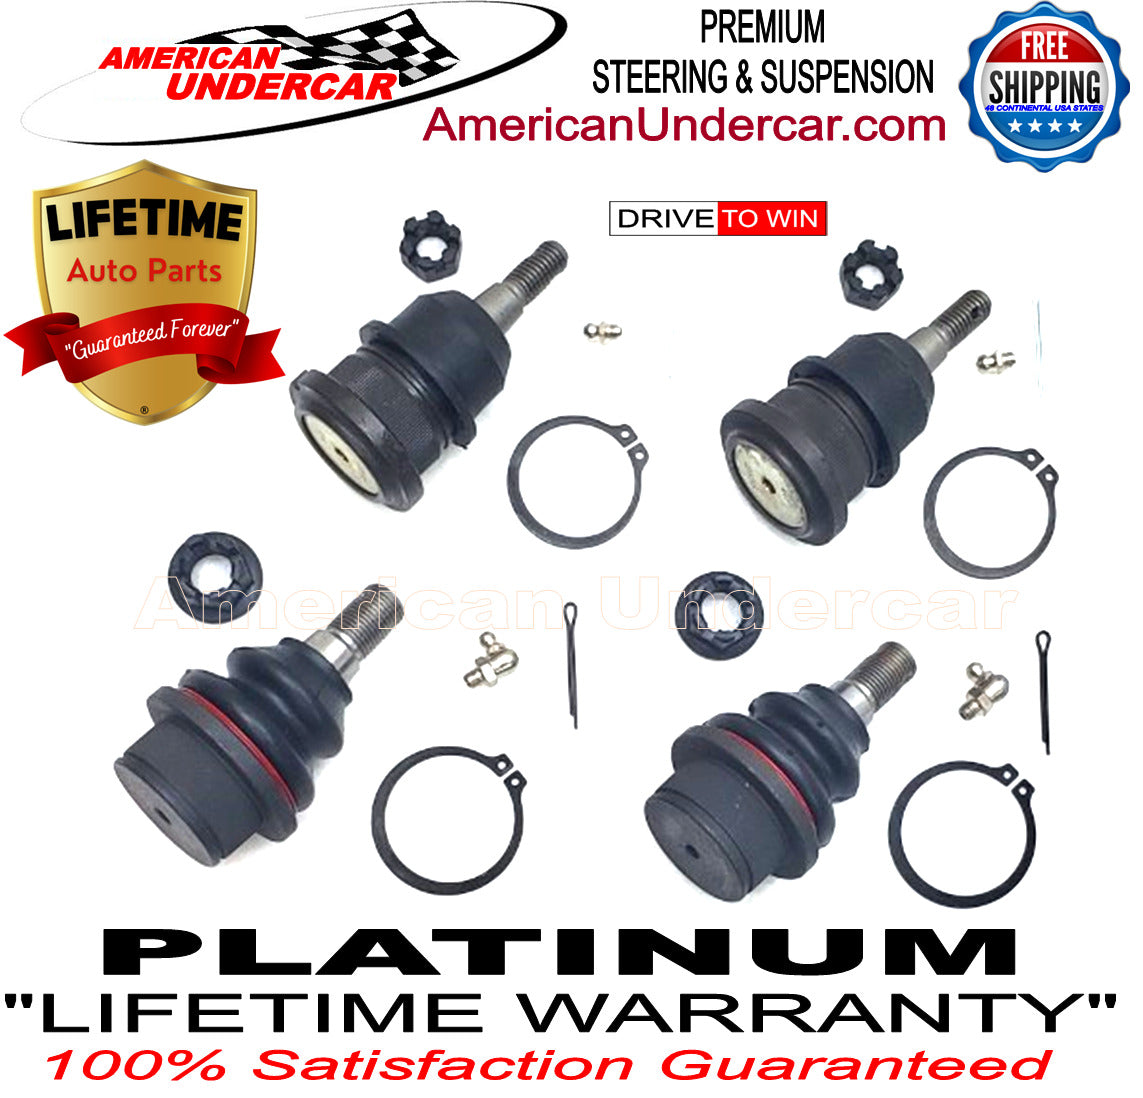 Lifetime Ball Joint Upper & Lower Kit for 1999-2007 Chevrolet, GMC, Cadillac 2WD, 4x4